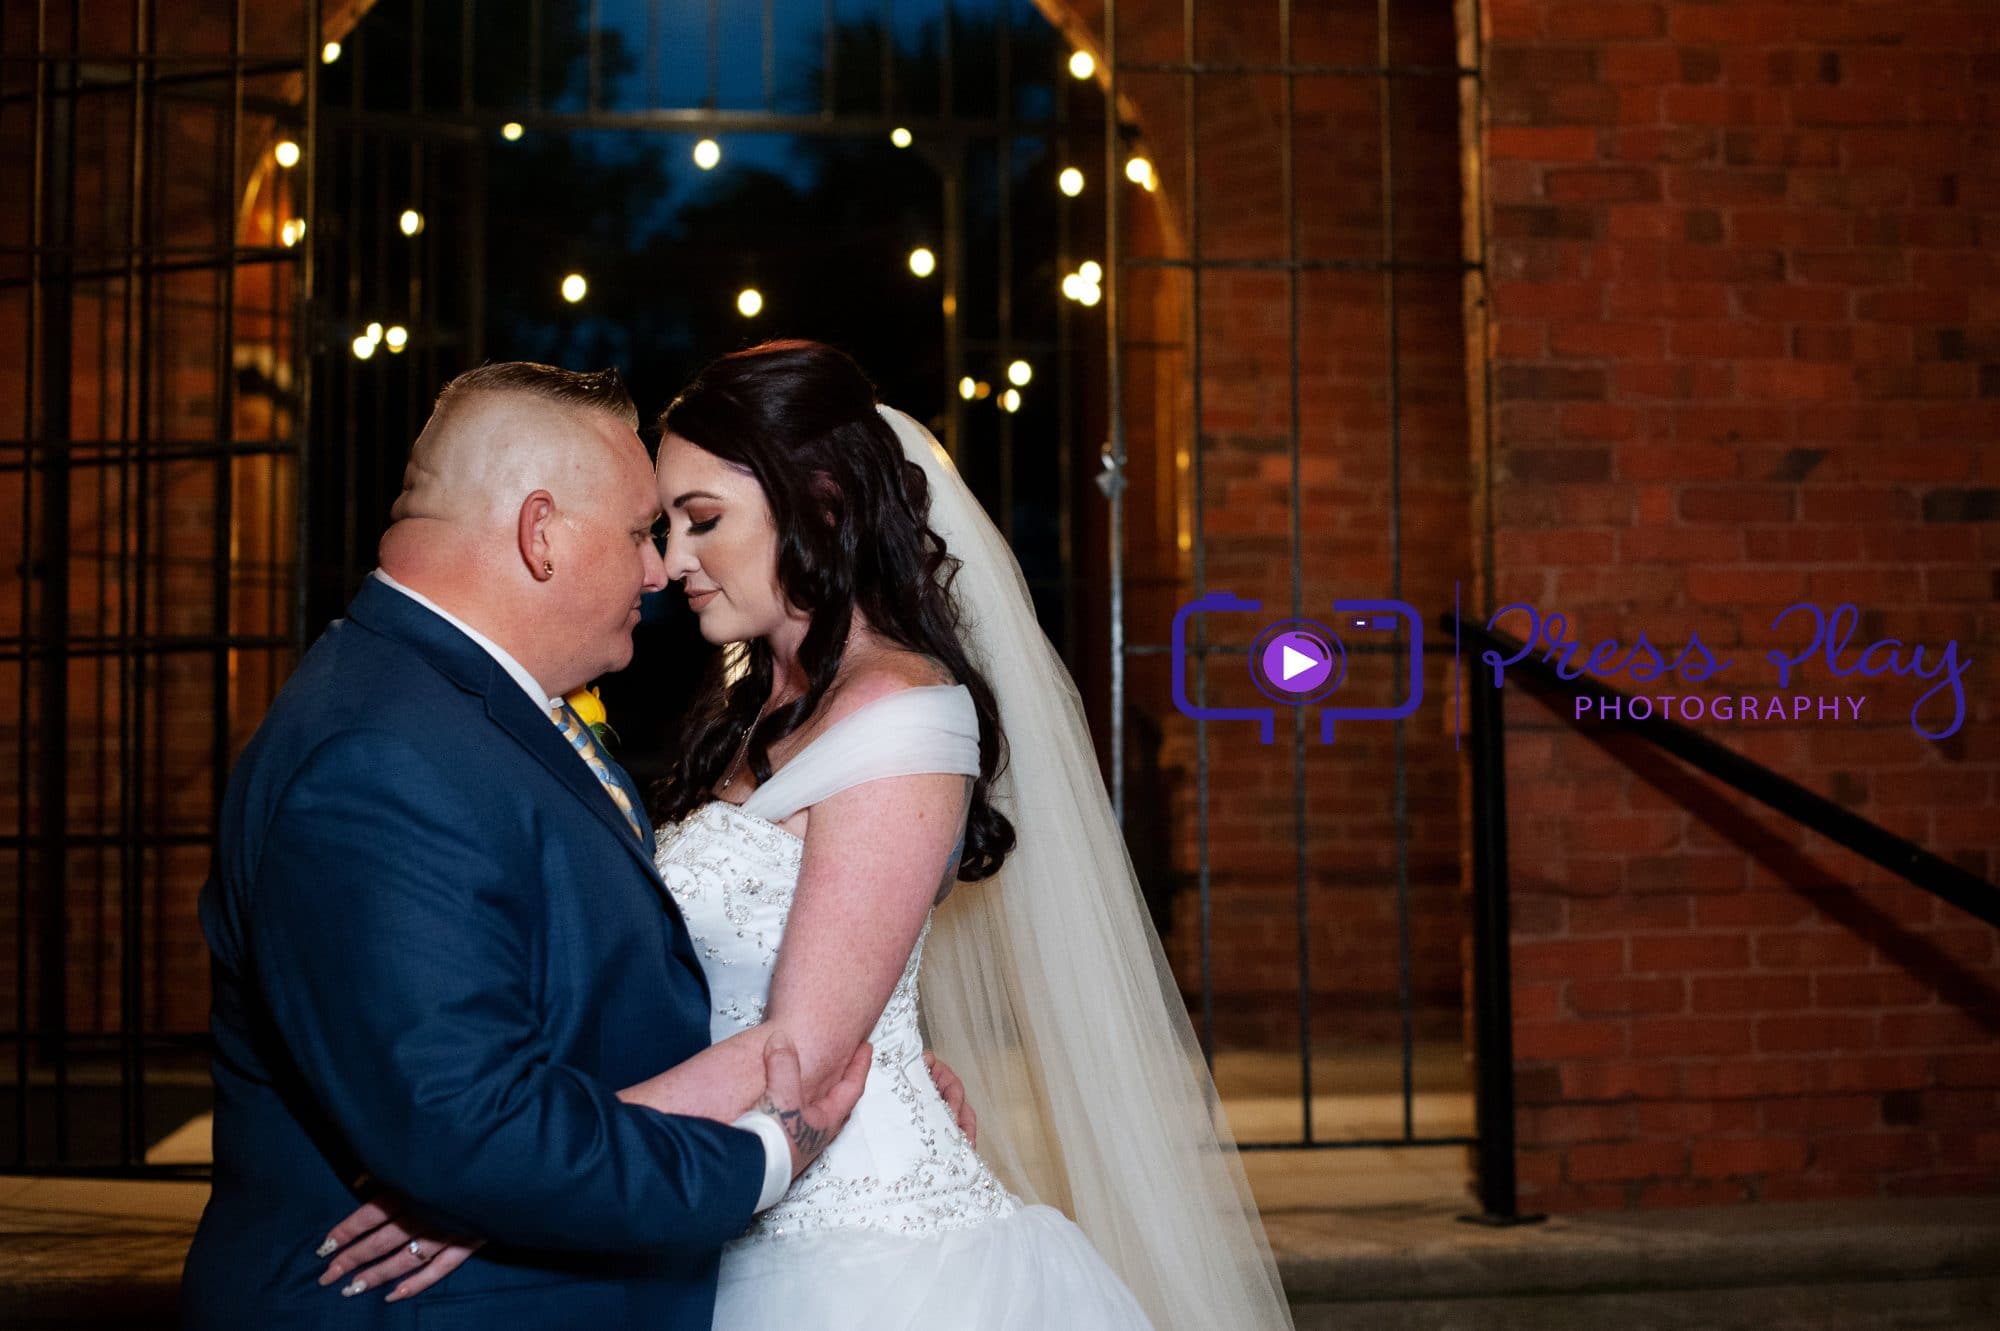 Bride and groom in brick archway with market lighting